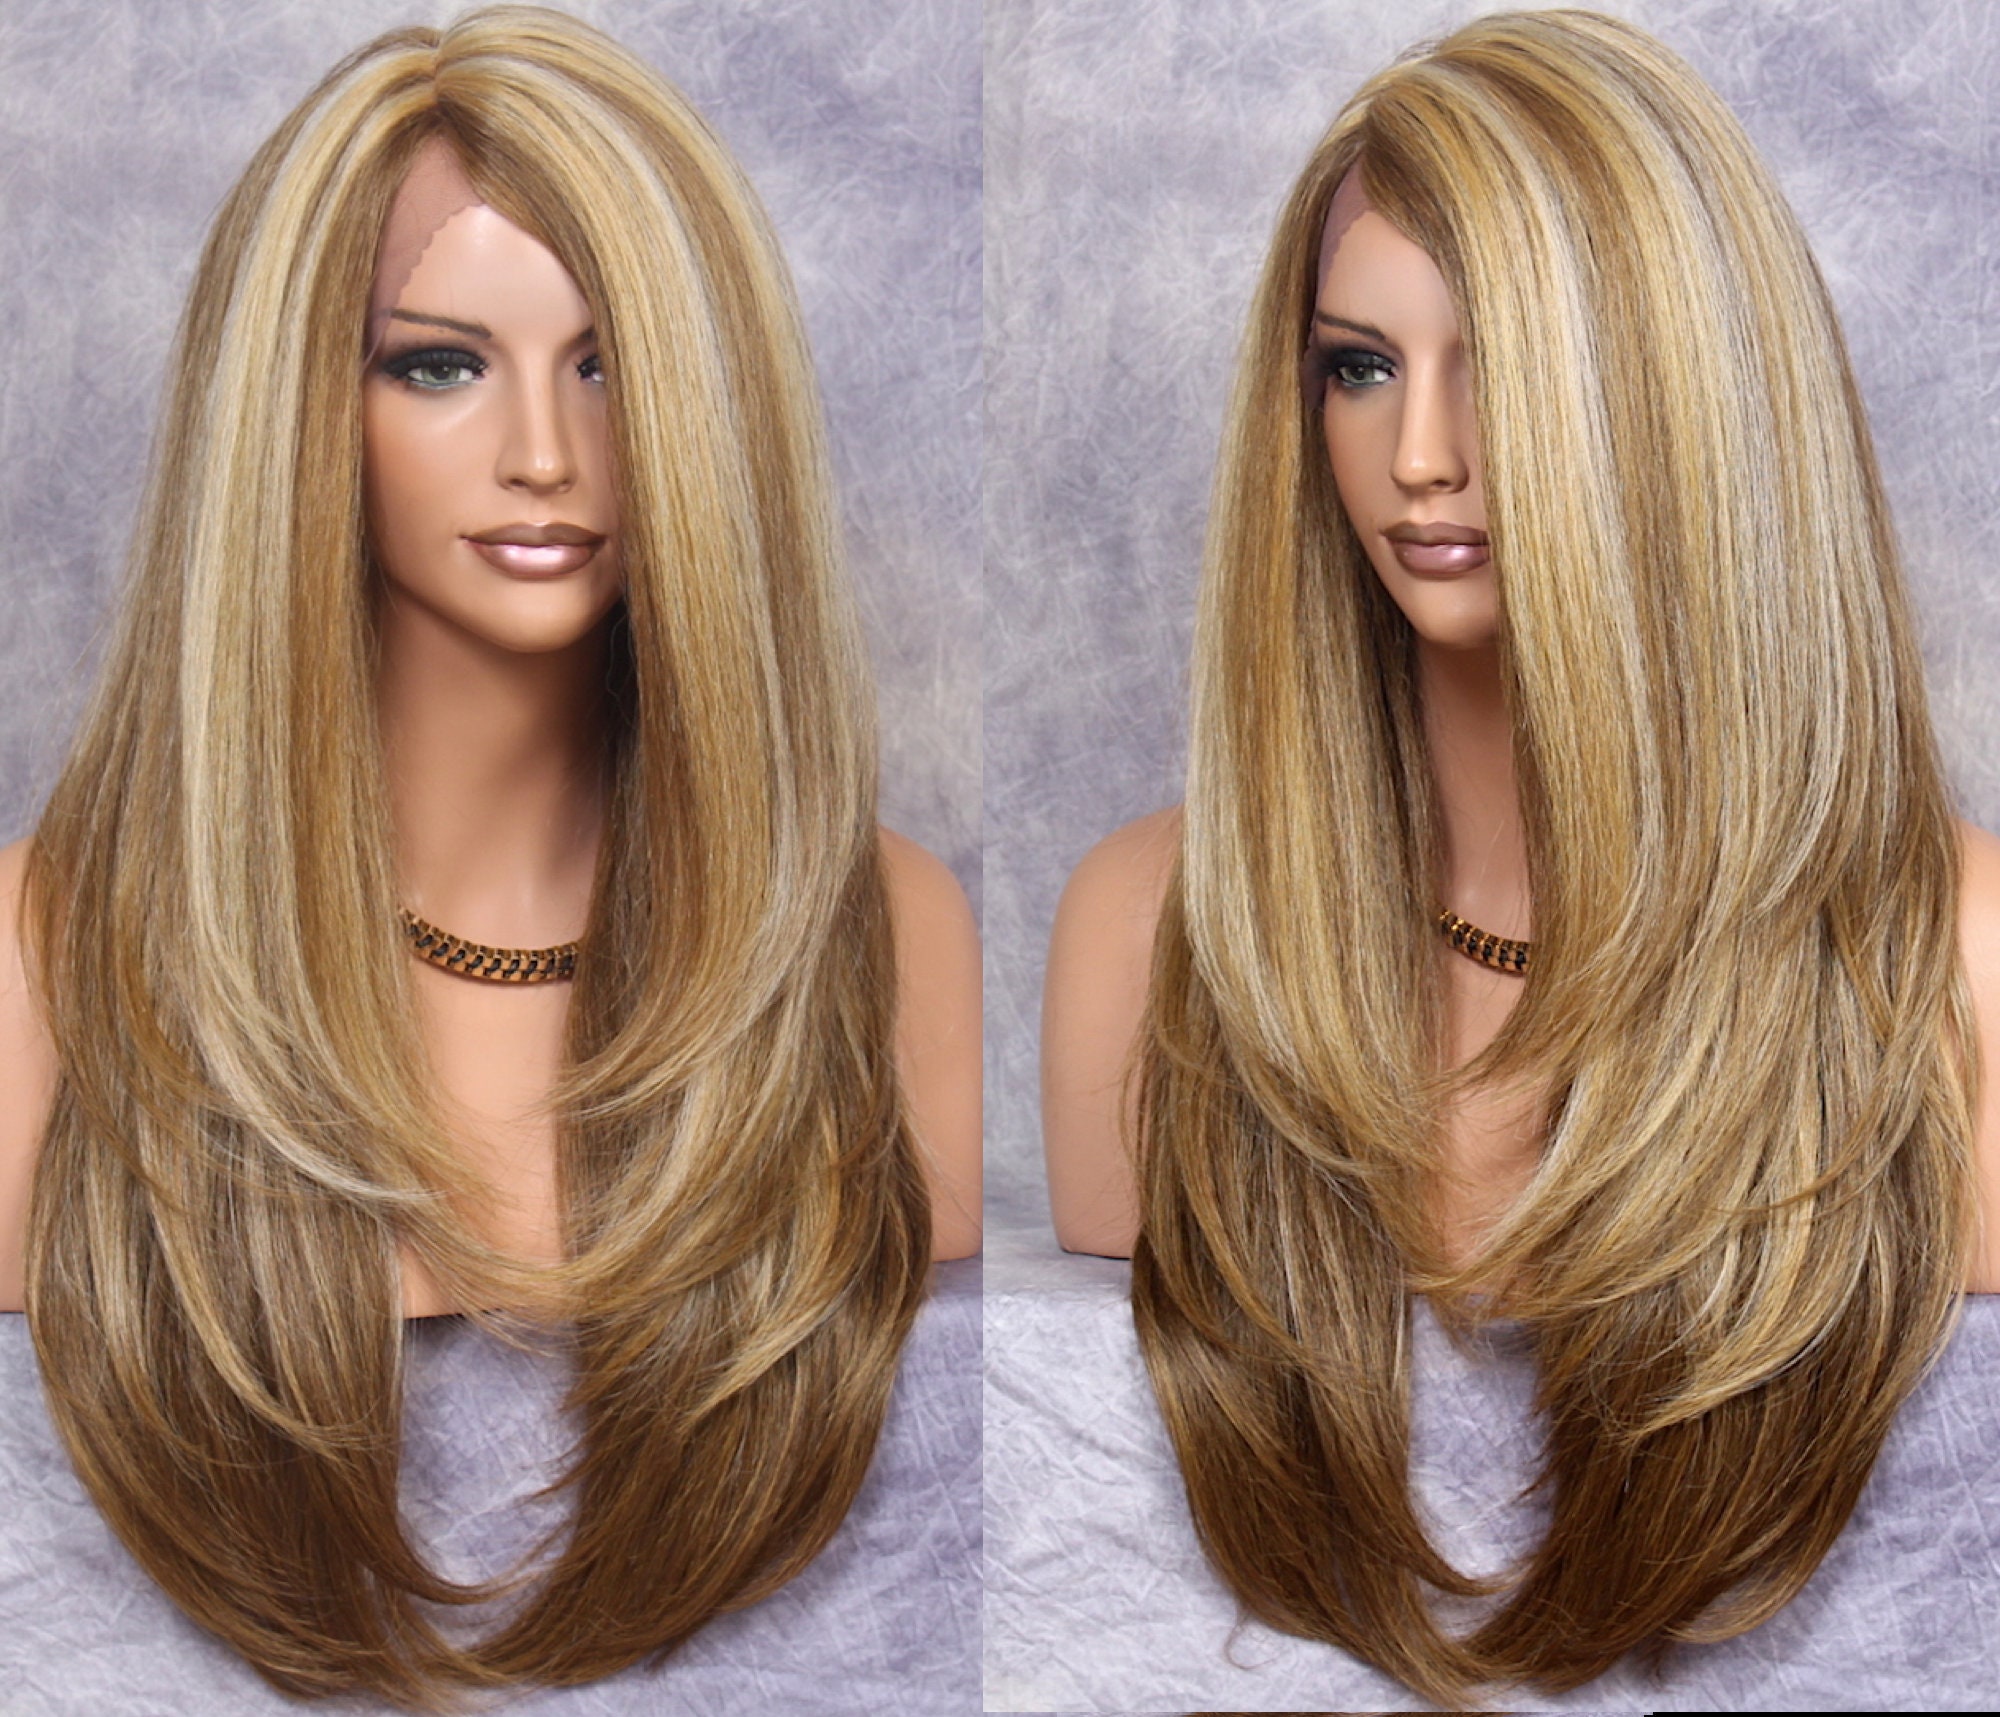 Human Hair Blend Wig Heat Ok Full Lace Front Textured Body Straight Tangerine Dark N Light Blonde Brown Mix Cancer/Alopecia/Cosplay